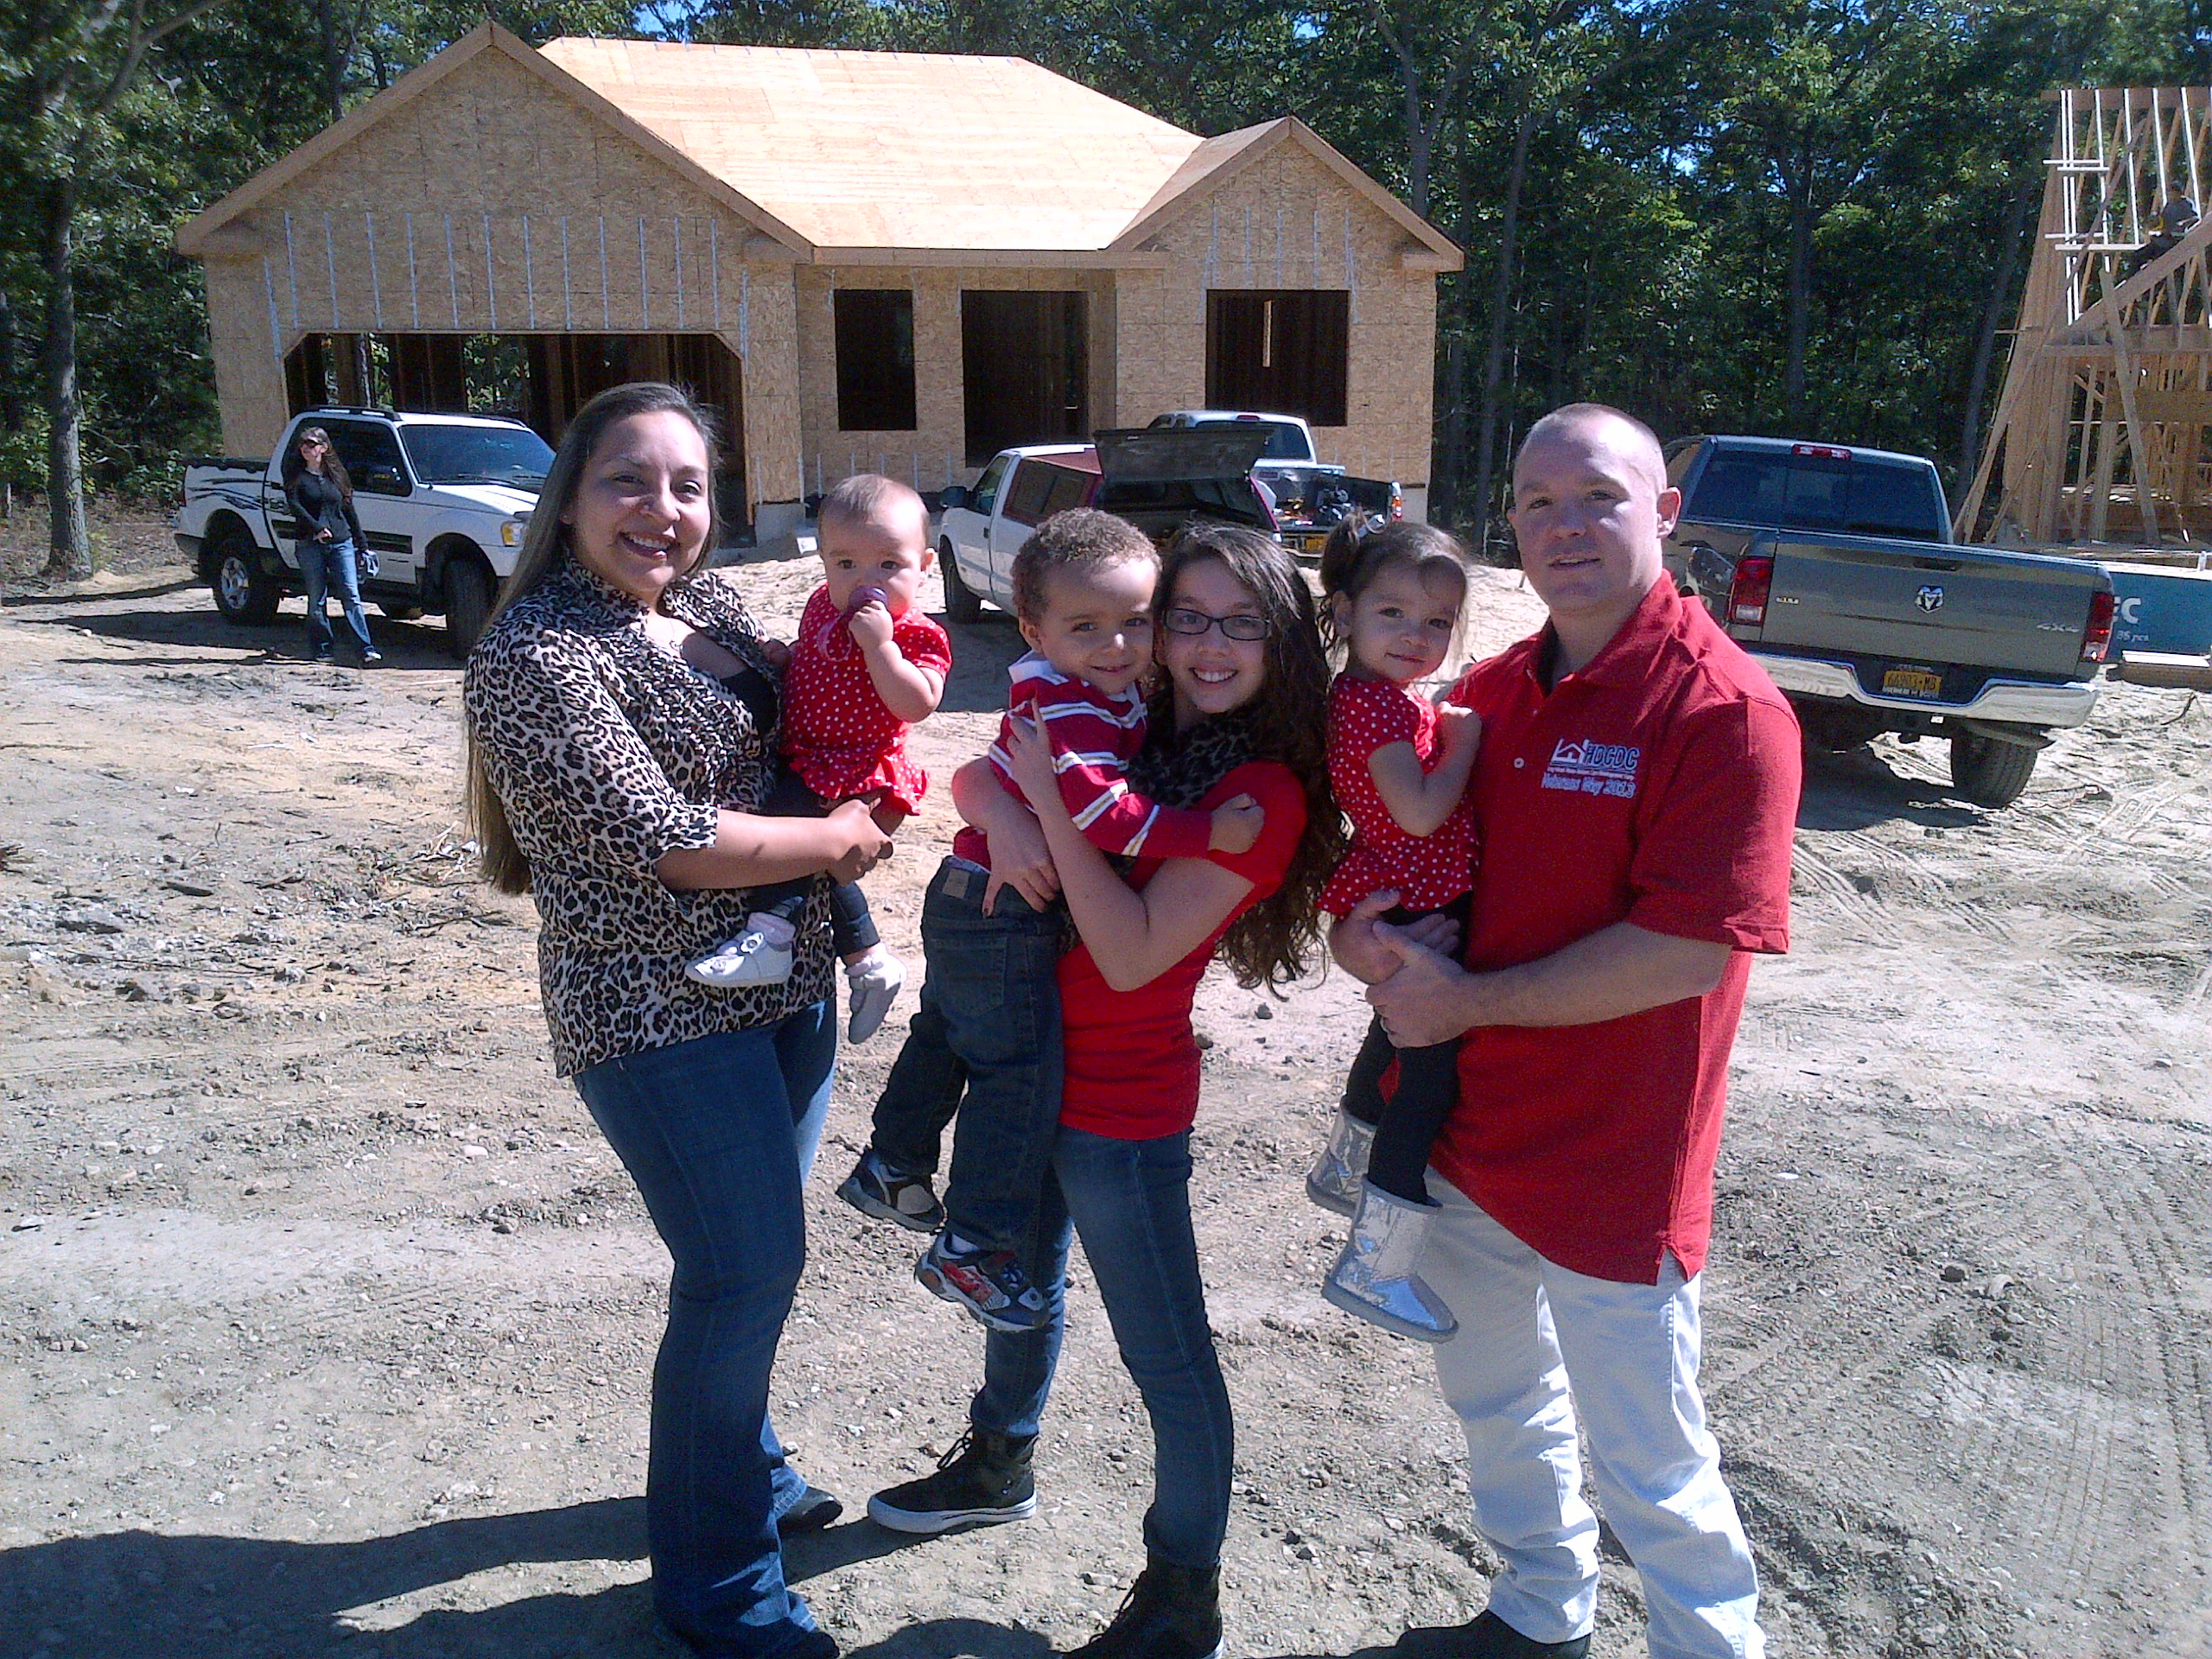 Marine Staff Sgt. Shawn Hunkins and his family are getting a new home in Islandia on Long Island for half price, thanks to a charitable group. Sept. 24, 2013. (credit: Sophia Hall/WCBS 880)